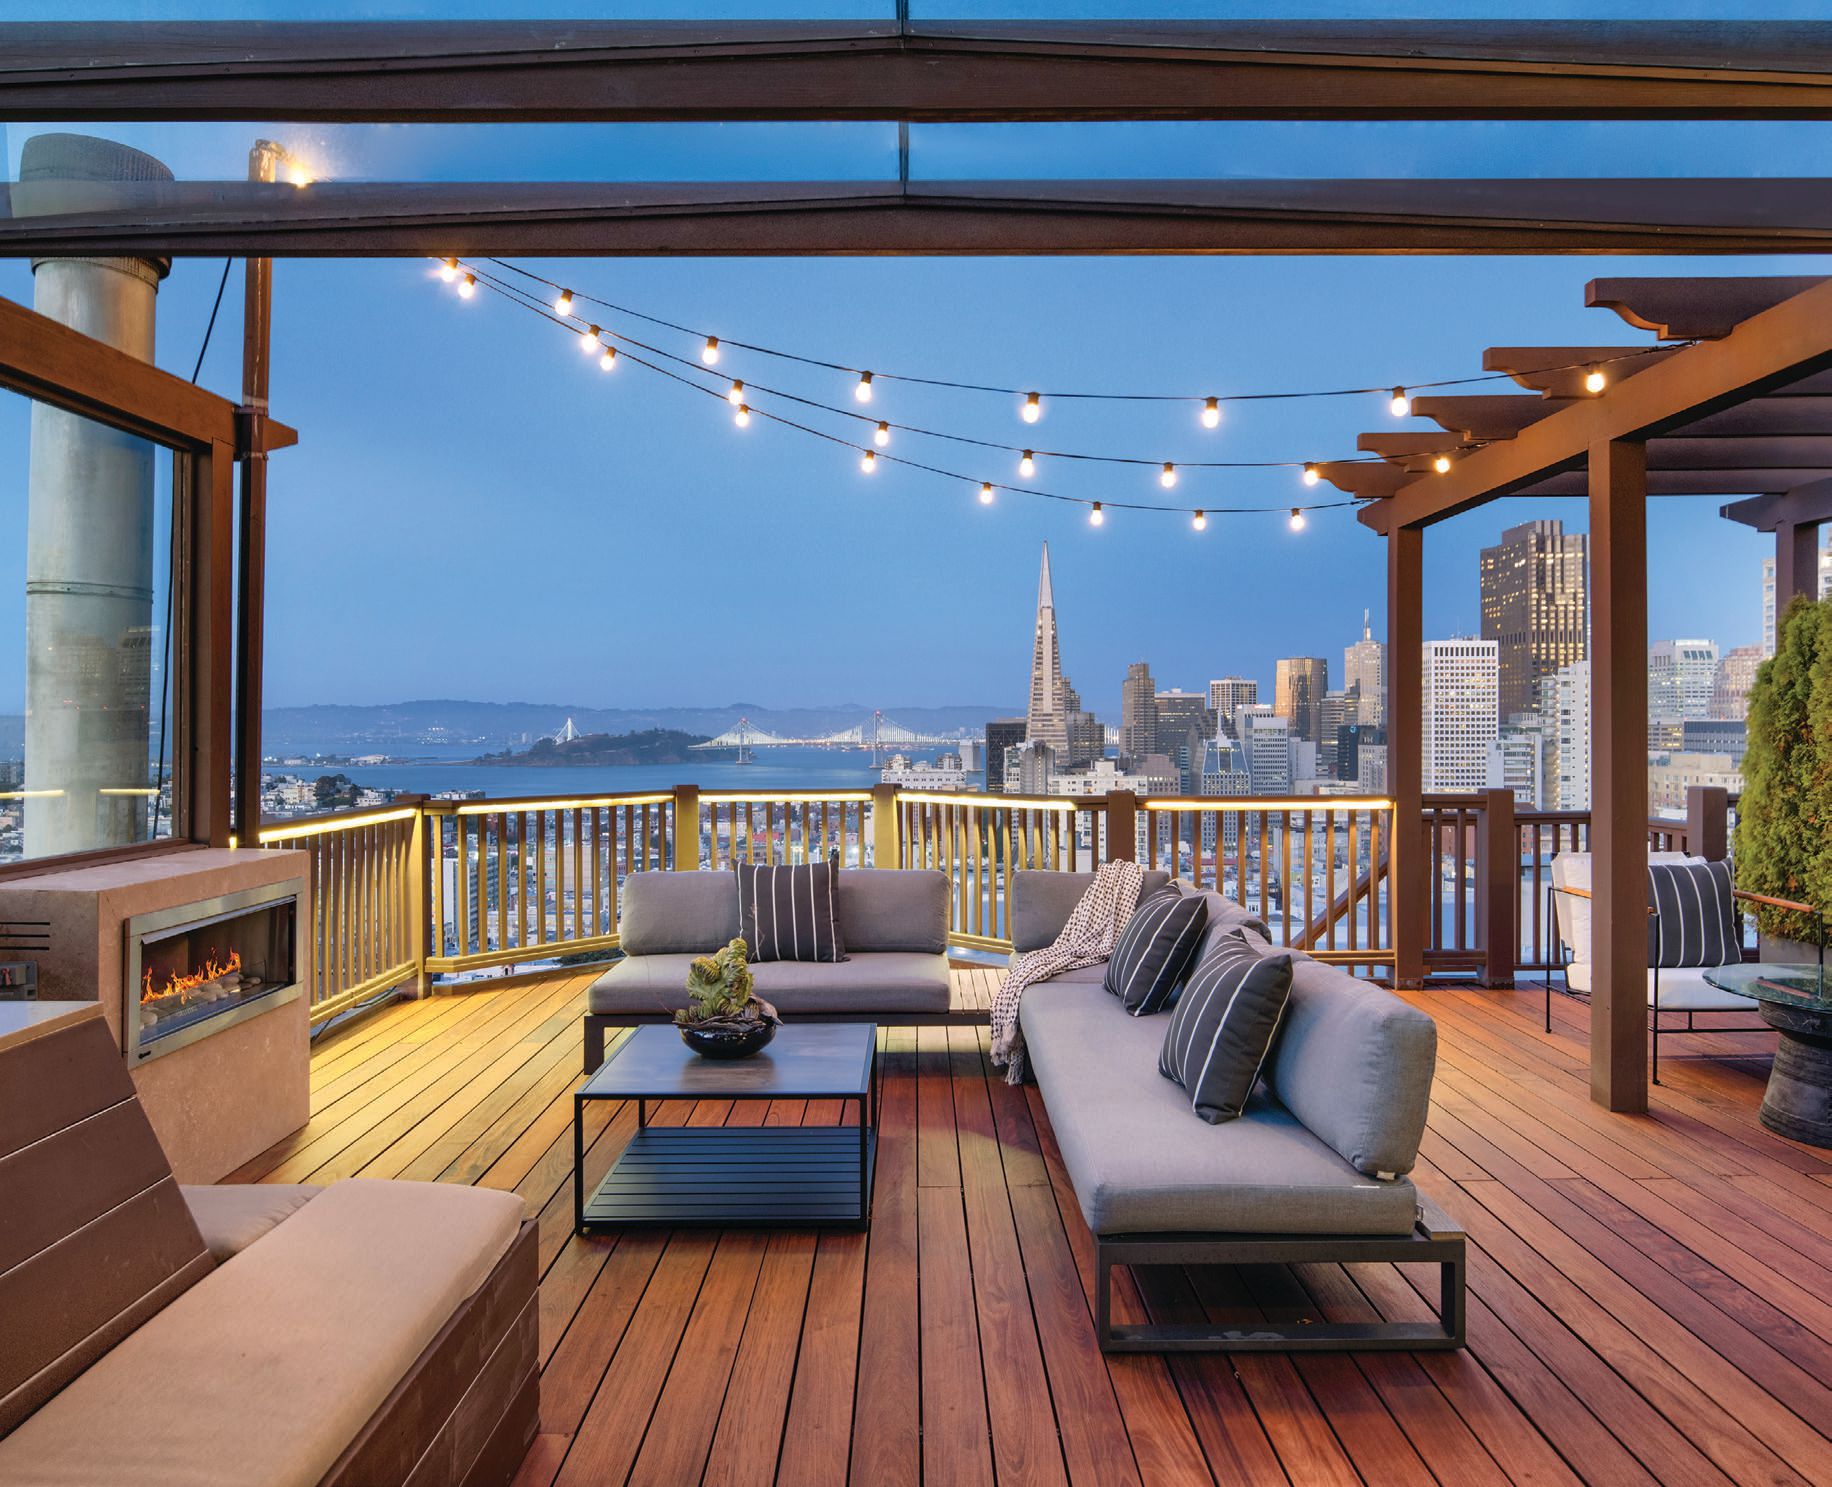 The rooftop offers sweeping city views PHOTO BY BRIAN KITTS VISUALS/COURTESY OF THE COSTA GROUP